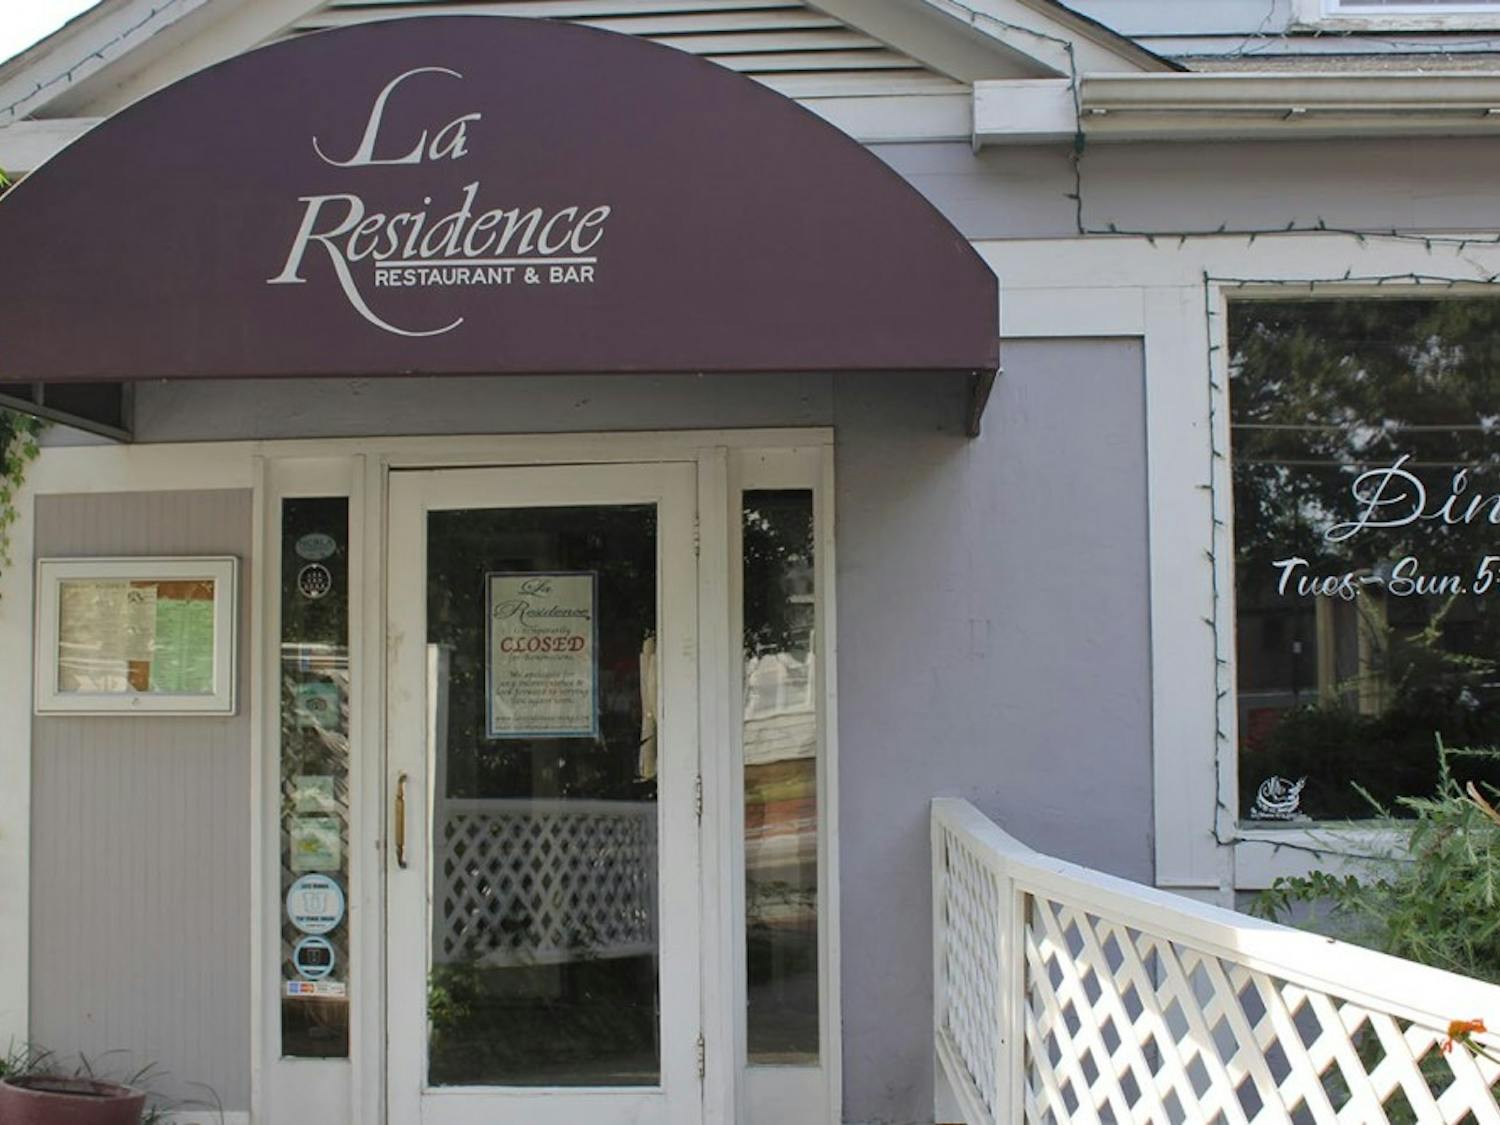 La Residence, restaurant and bar located on Rosemary Street, is currently closed due to renovations caused by a fire this past summer. 